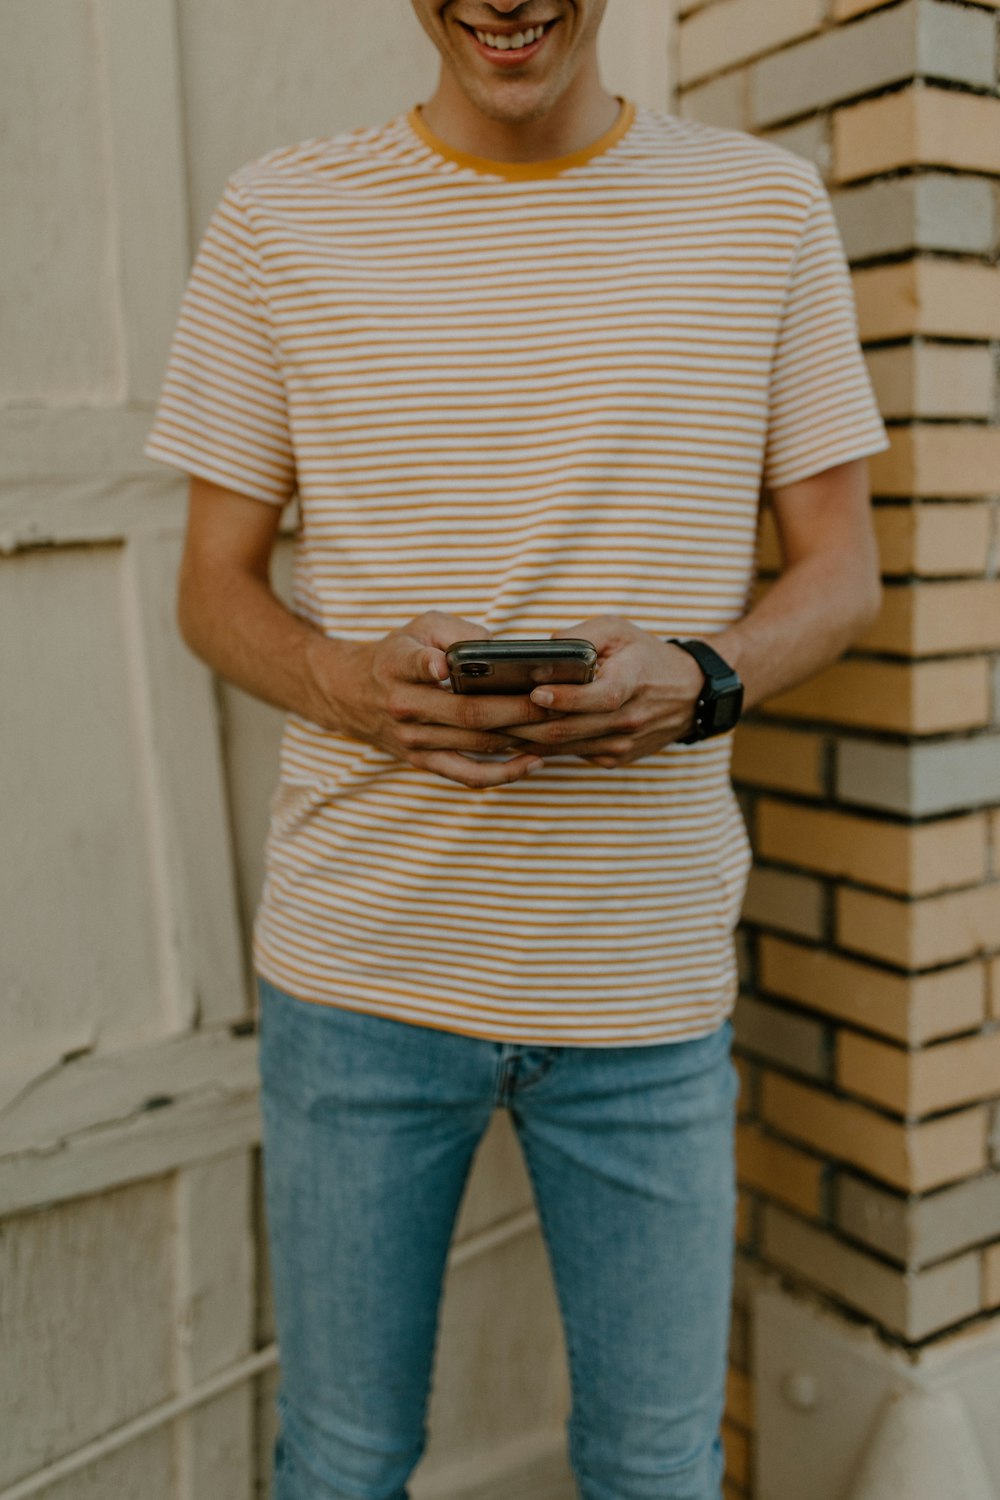 man in white and black striped shirt and blue denim jeans holding black smartphone